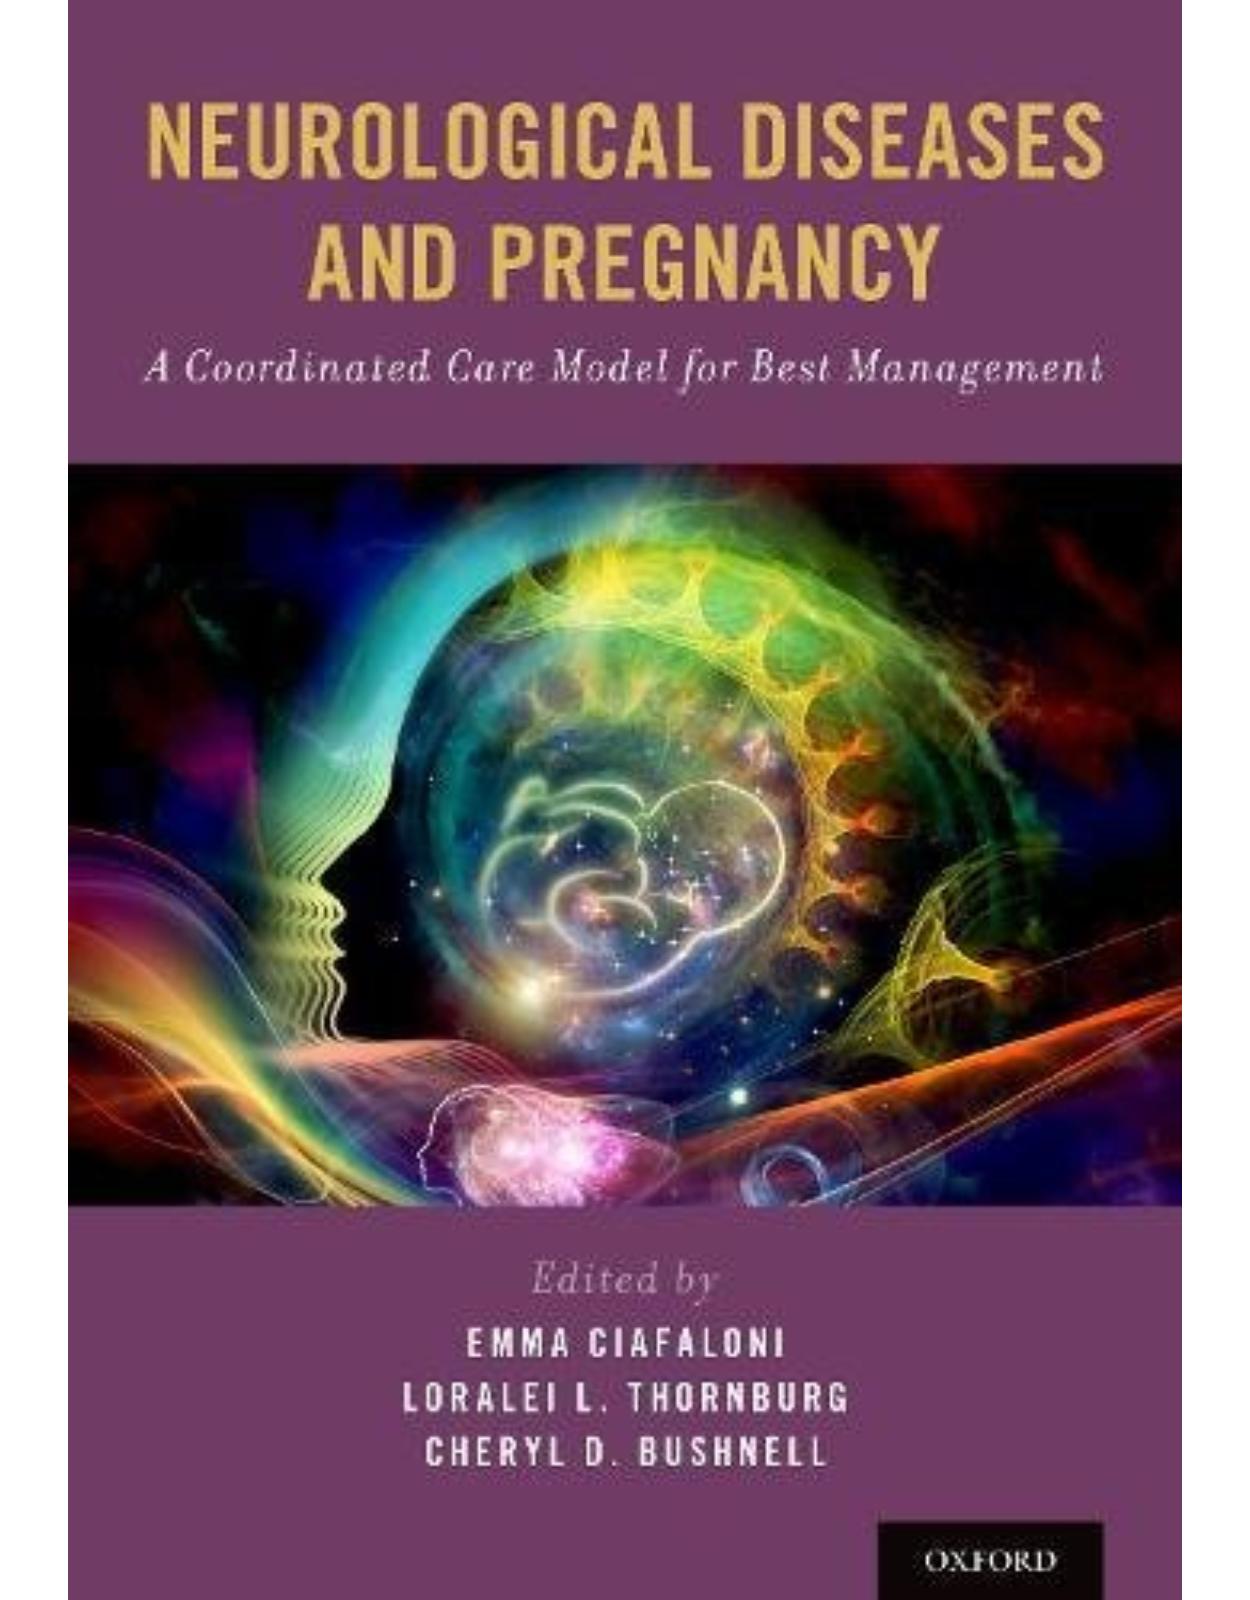 Neurological Diseases and Pregnancy: A Coordinated Care Model for Best Management